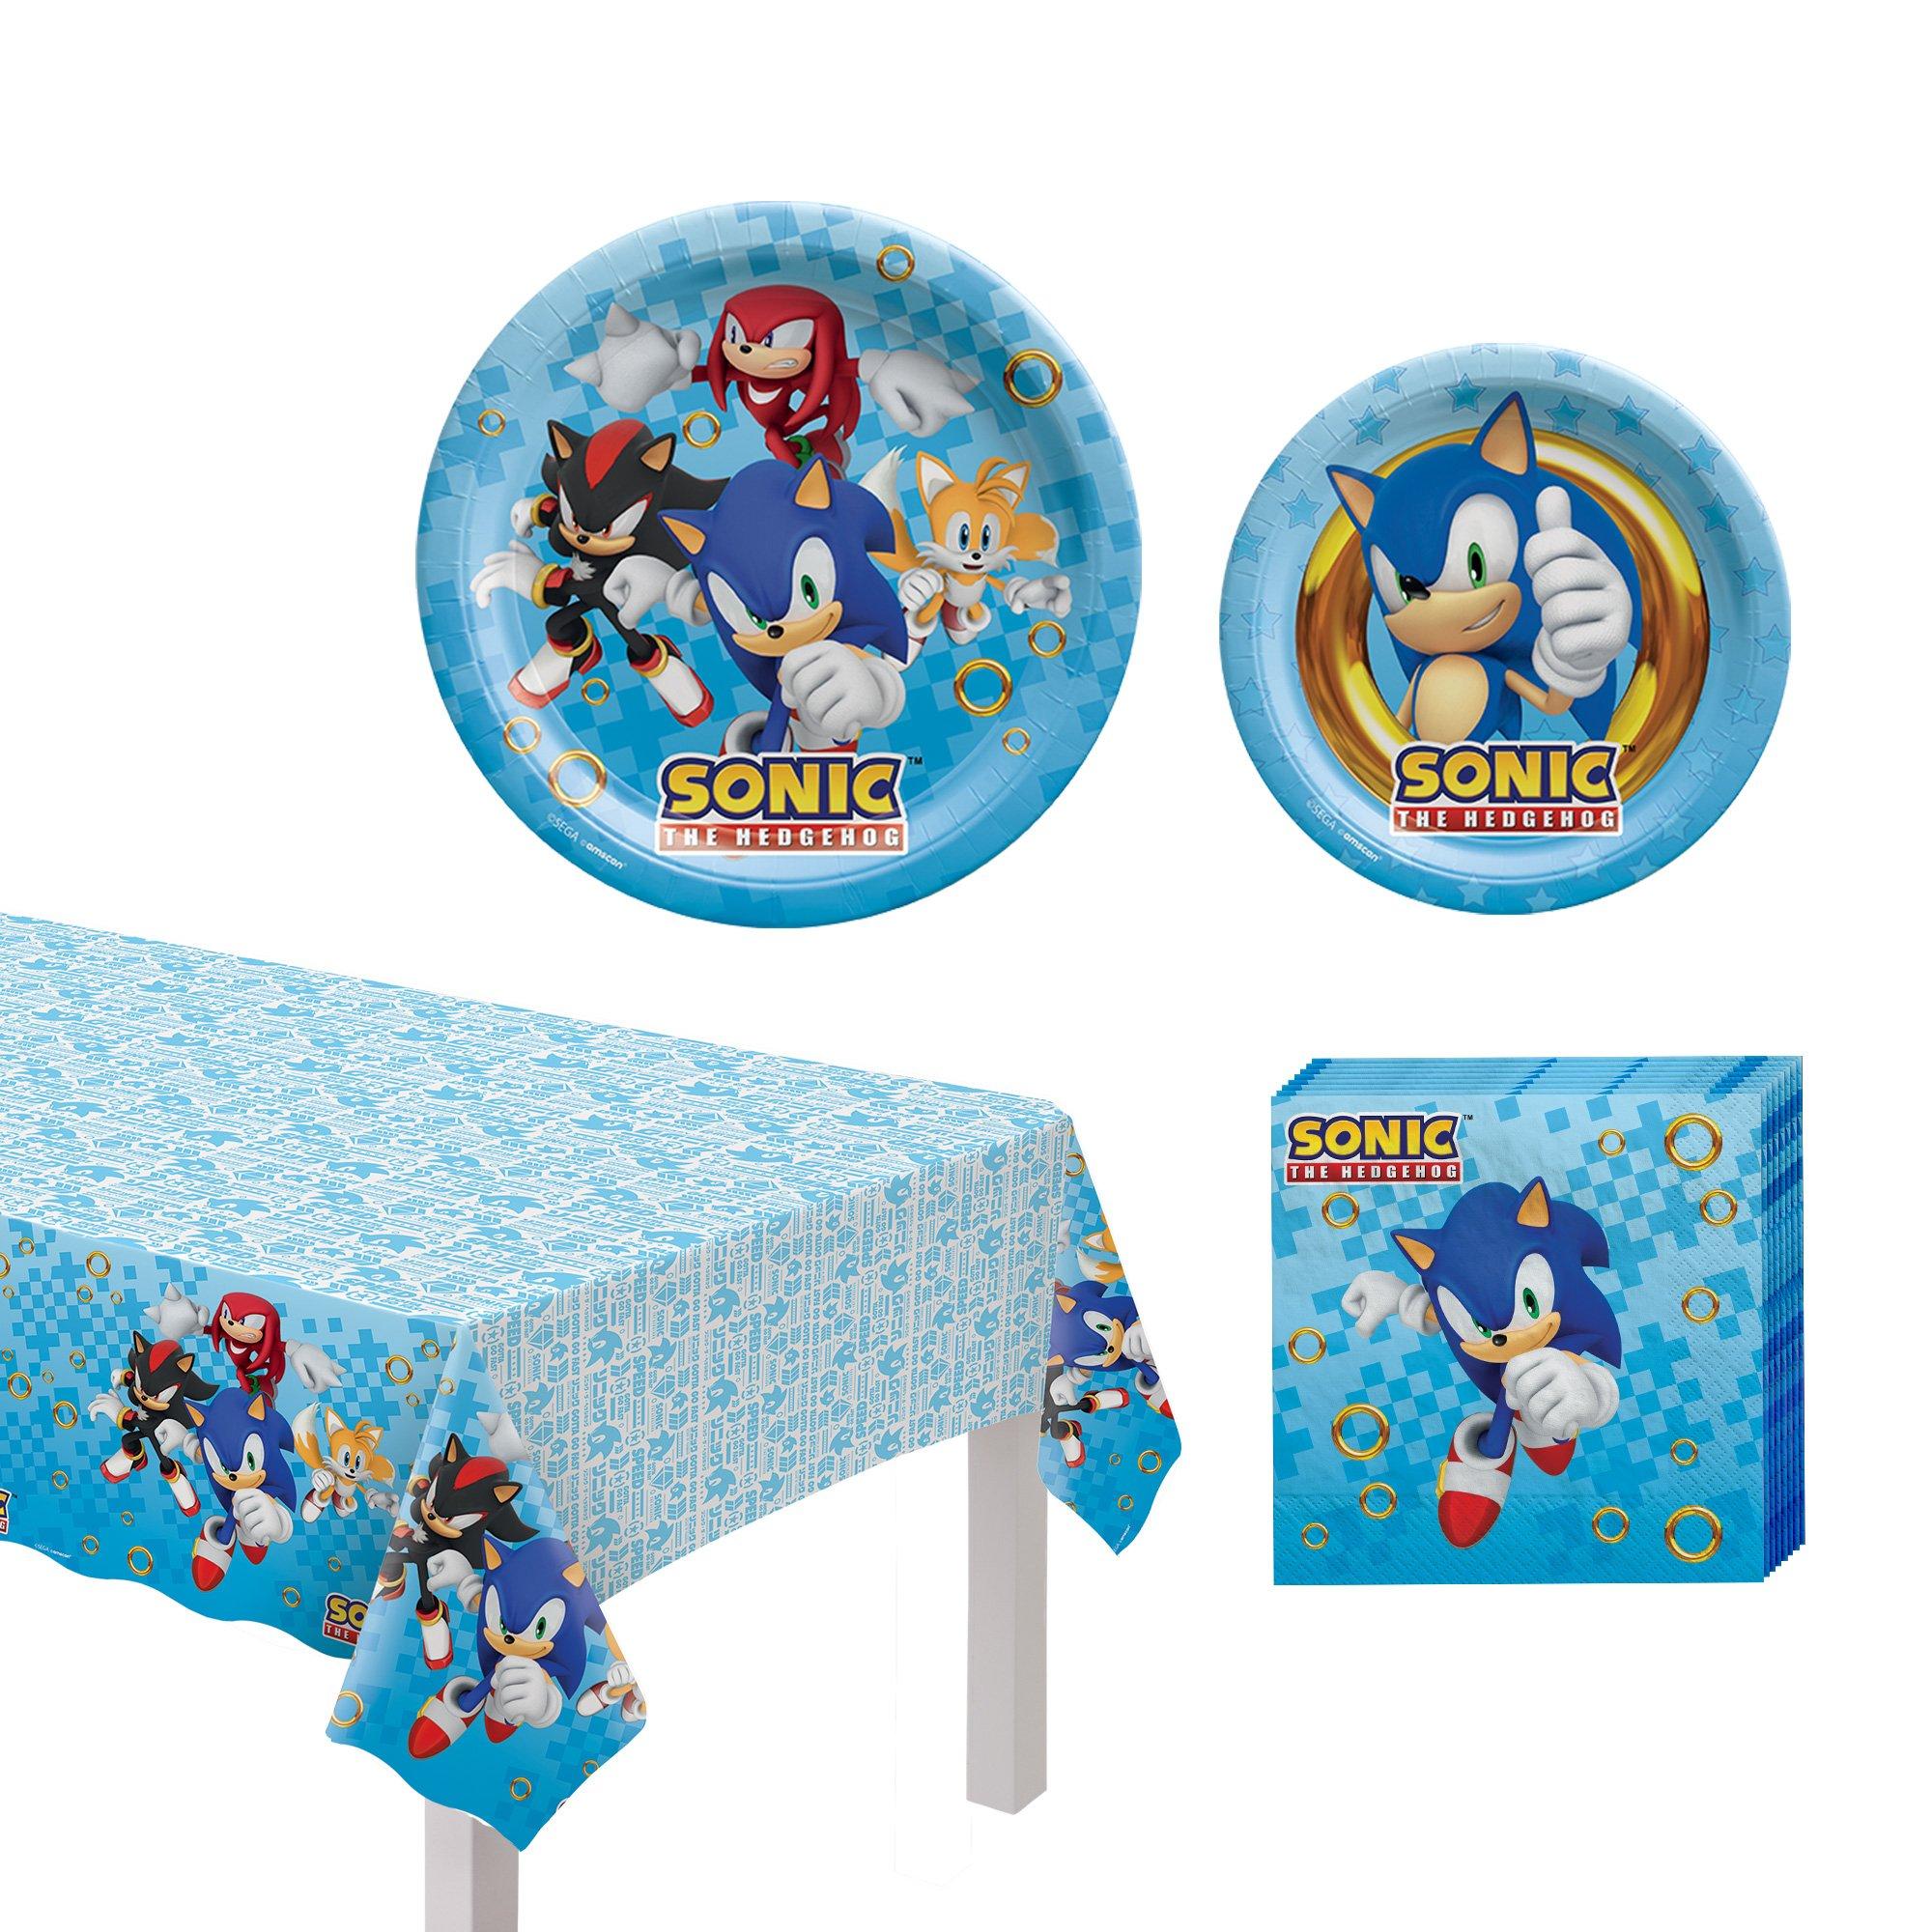 Sonic the Hedgehog Party Supplies Pack for 8 Guests - Kit Includes Plates, Napkins & Table Cover